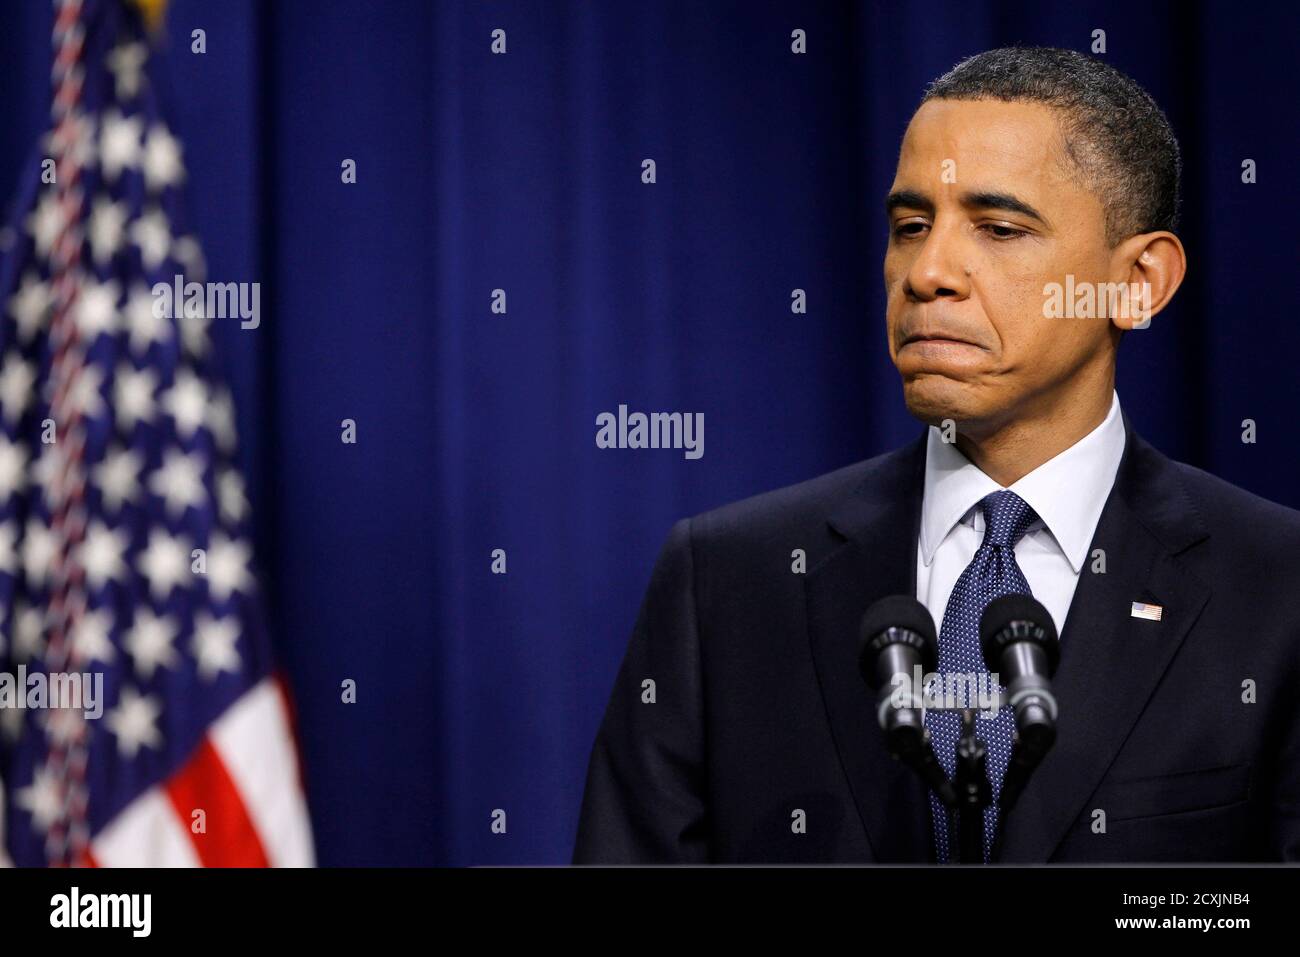 U.S. President Barack Obama holds a news conference in the South Court Auditorium of the Eisenhower Executive Office Building near the White House in Washington, March 11, 2011.   REUTERS/Jason Reed   (UNITED STATES - Tags: POLITICS) Stock Photo